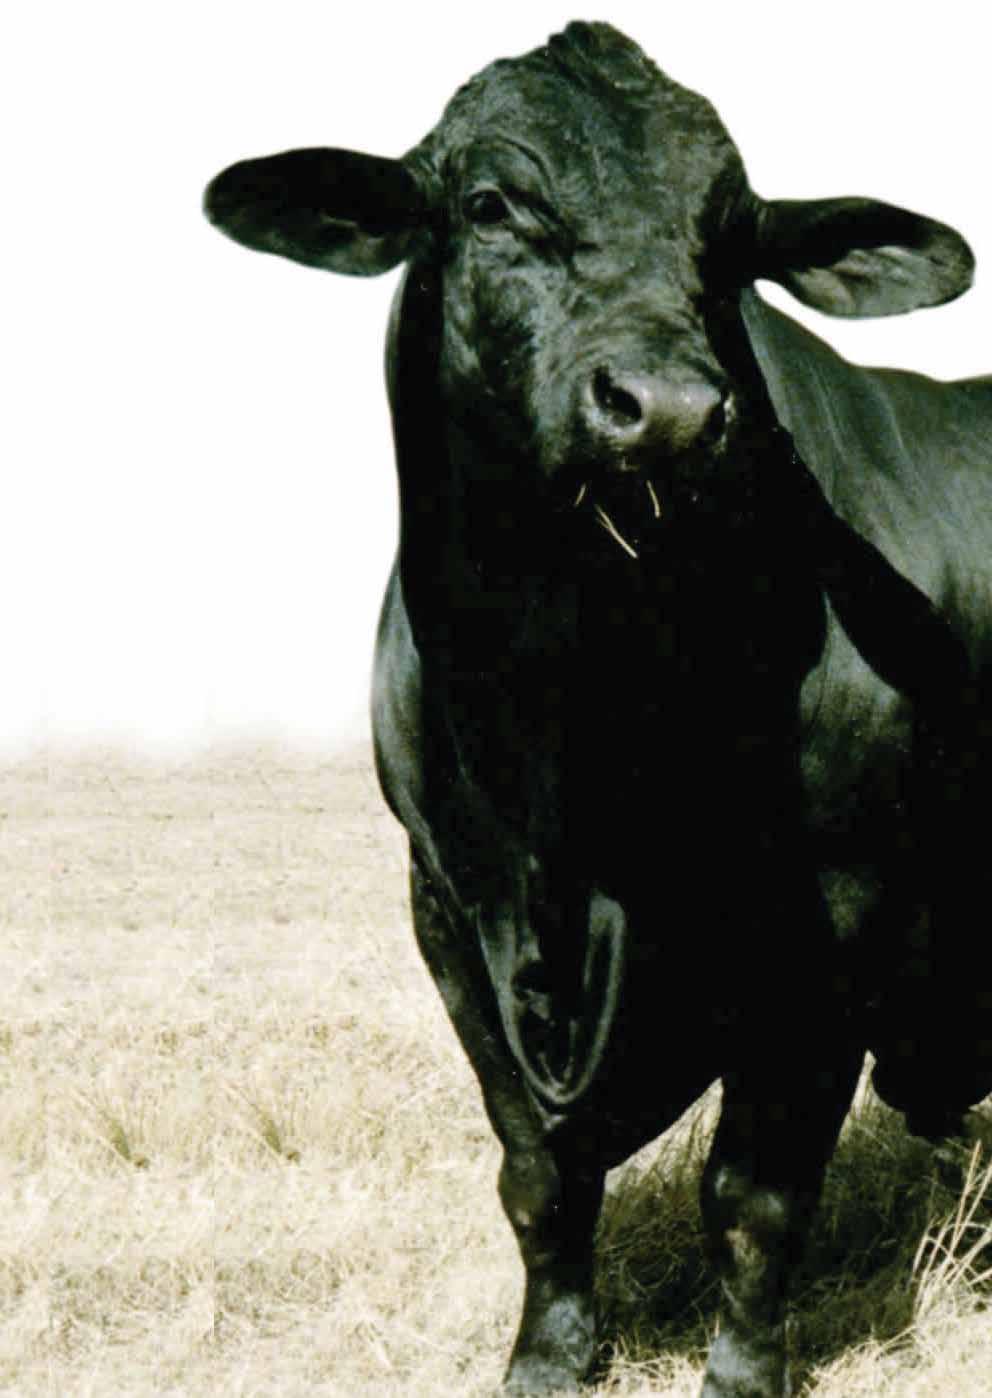 Category 2 Registered Purebred Breeding Cattle Breeding: Cattle in this category are purebred and have been sired by registered purebred stud bulls in a single or multiplesire mating